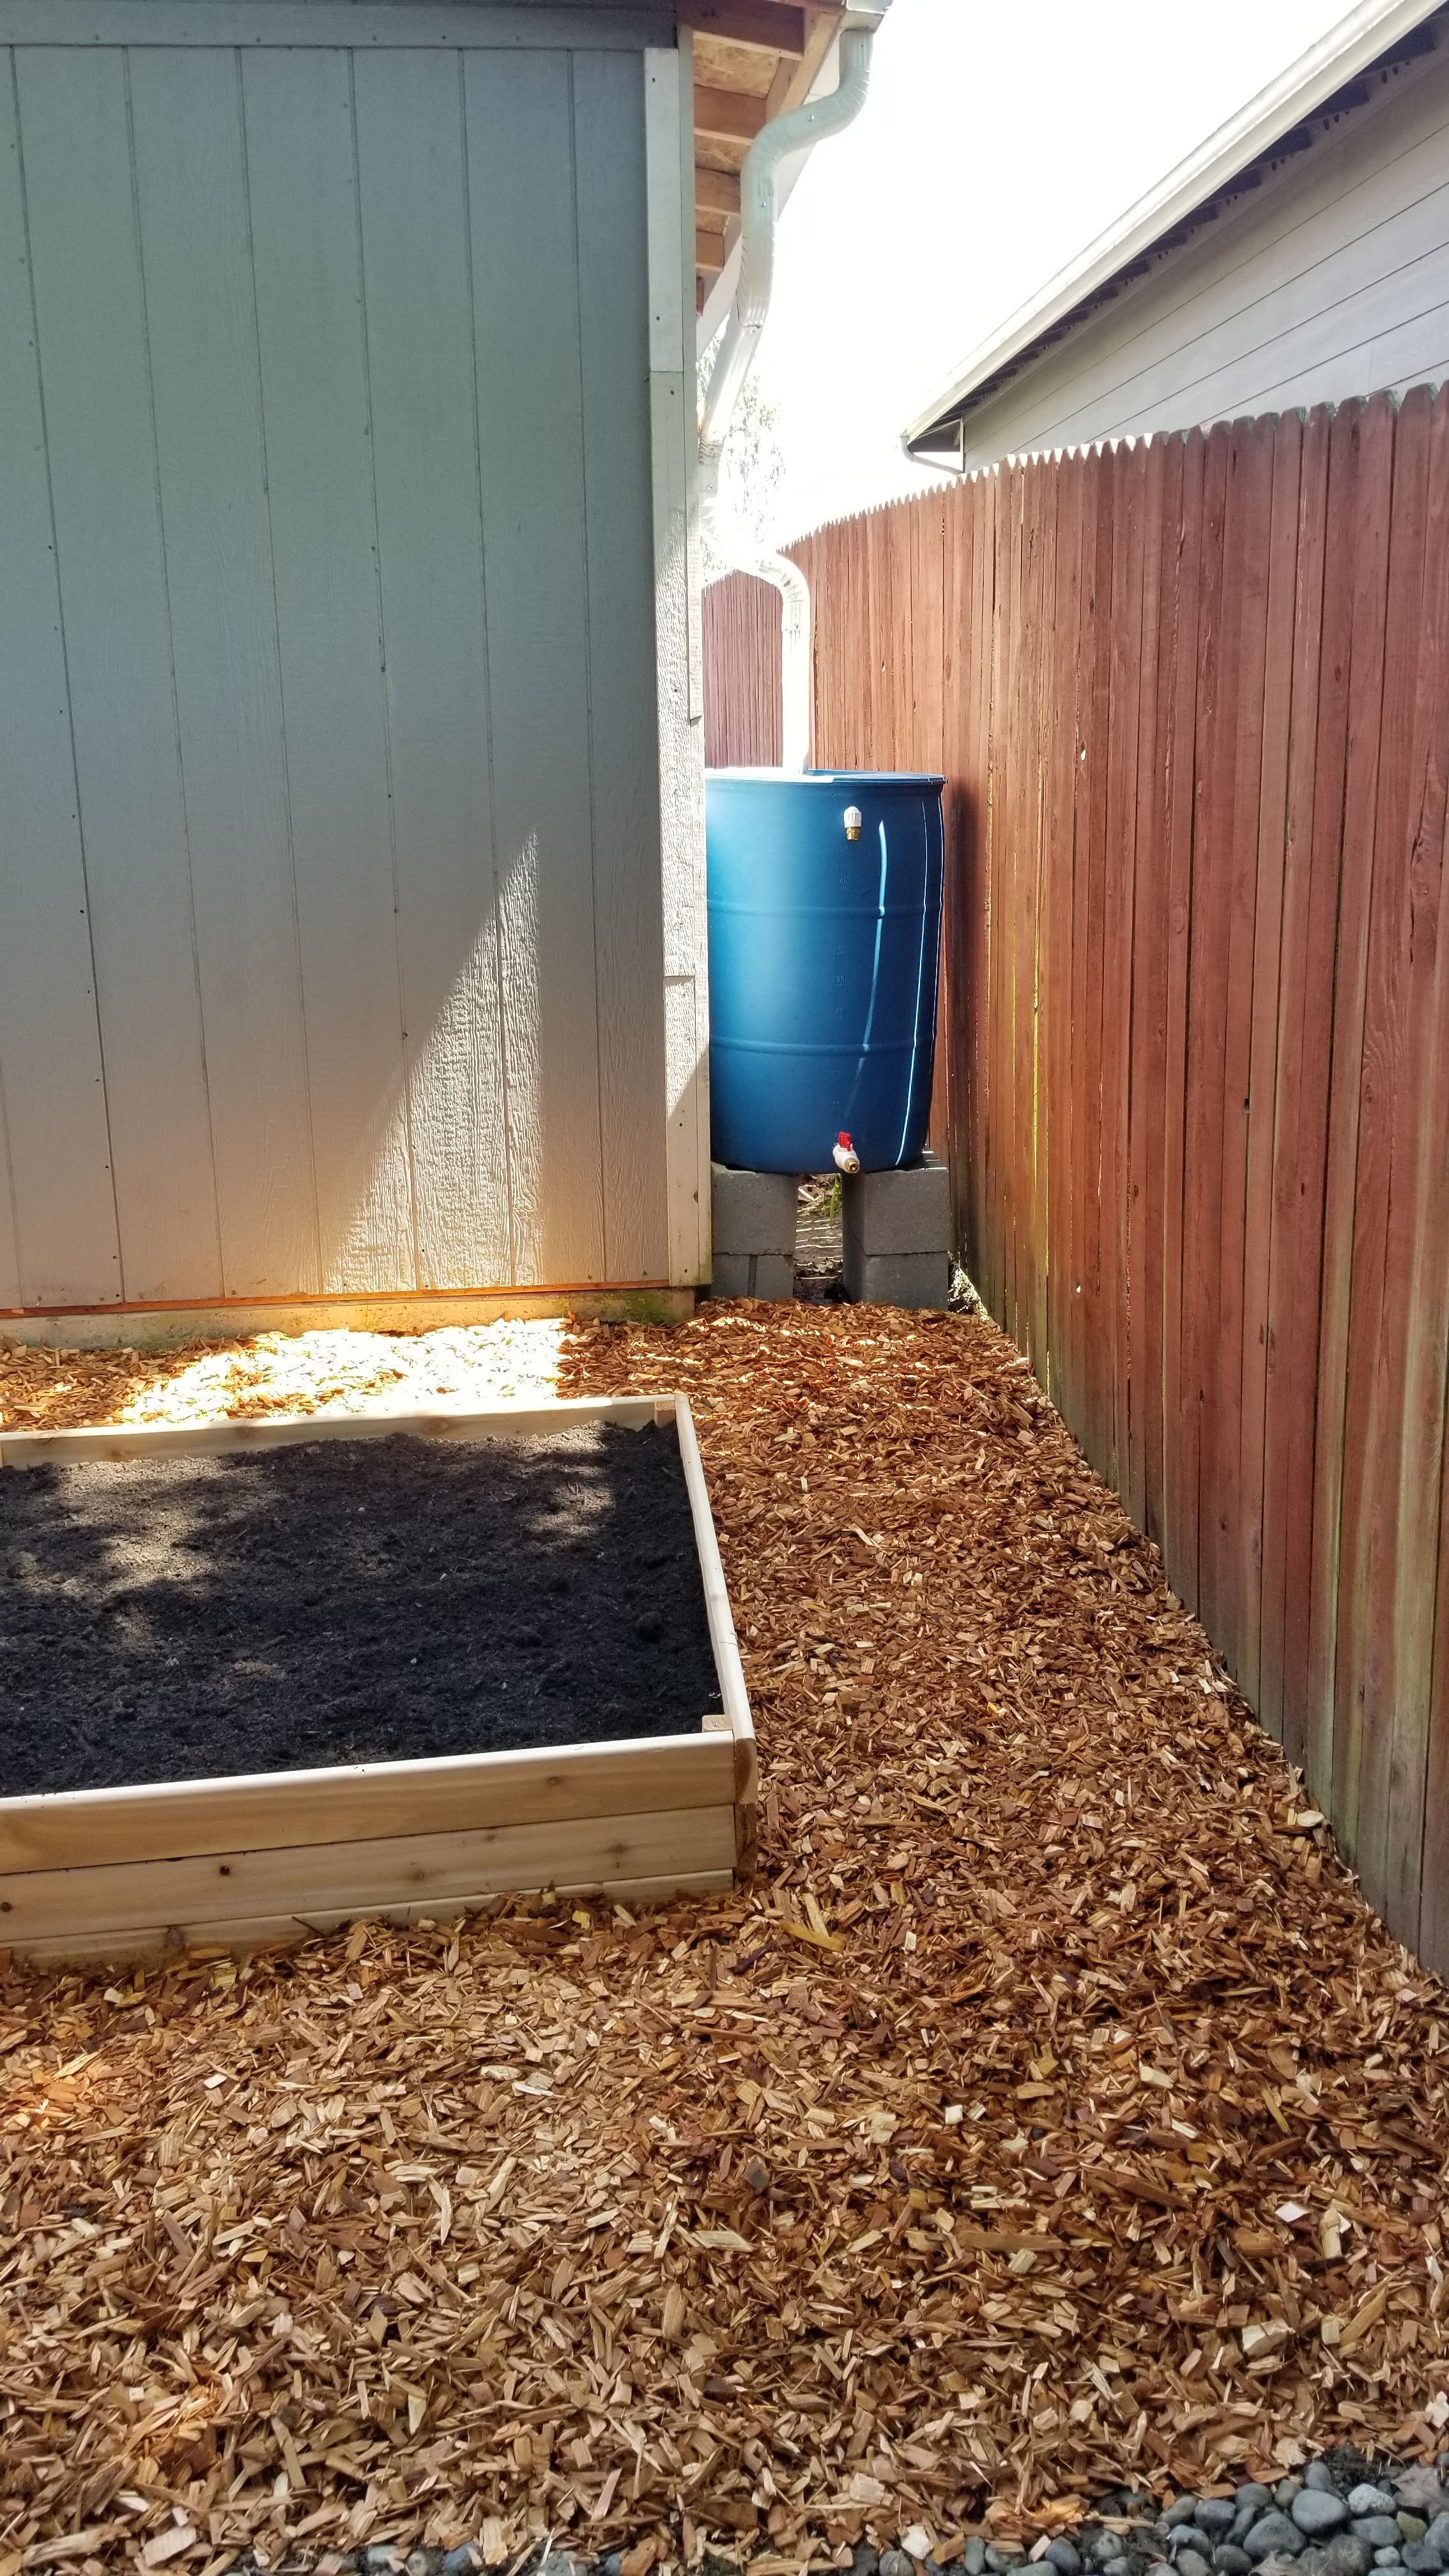 AFTER: Cedar chips are added around the bed to keep down weeds and grass, and provide a permeable surface so rainwater can infiltrate into the ground.